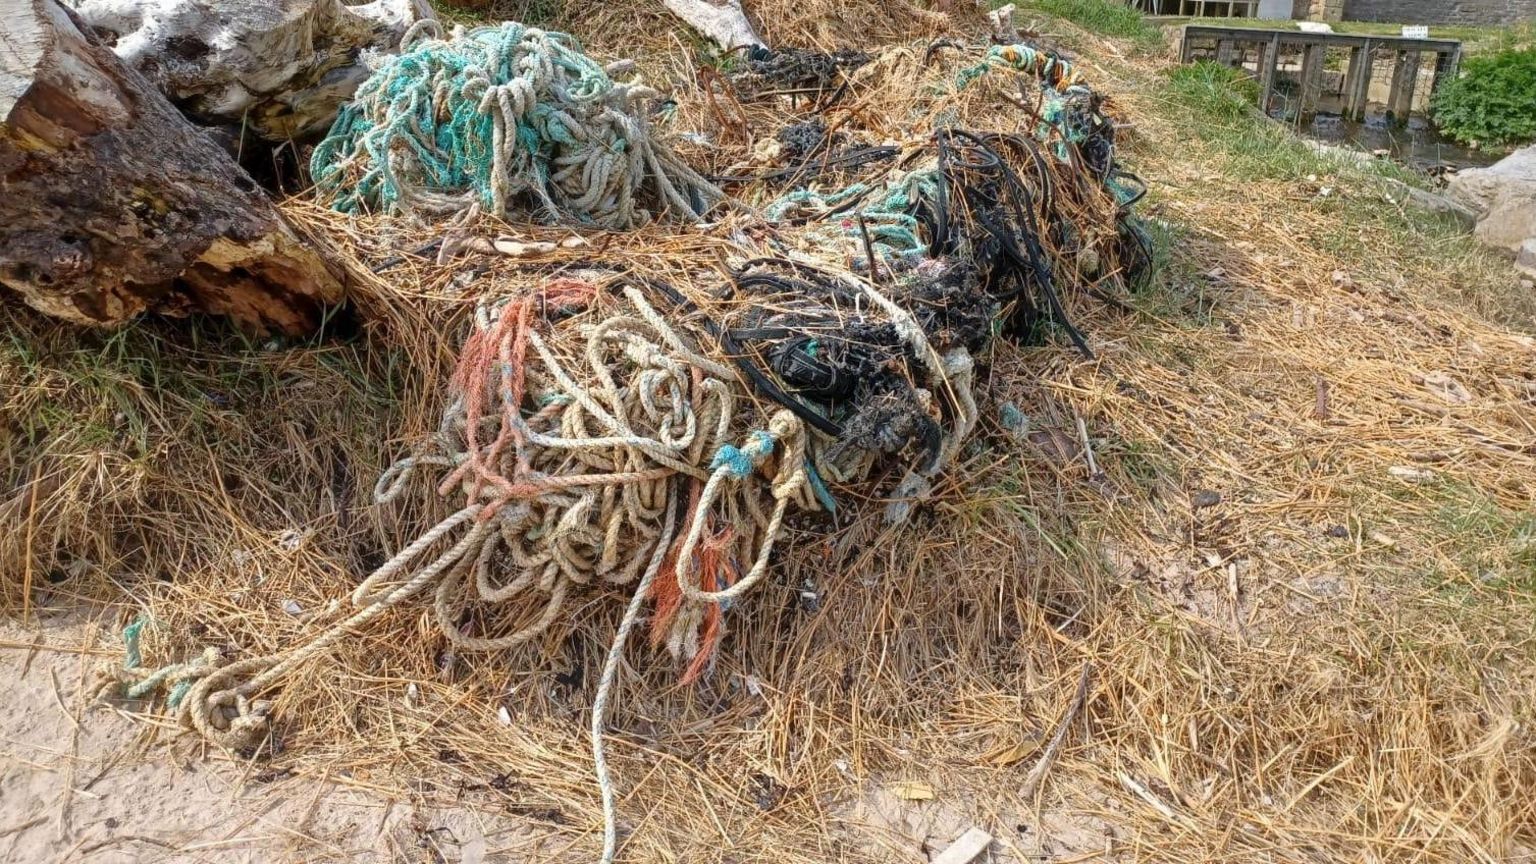 A pile of fishing tackle covered in storm debris